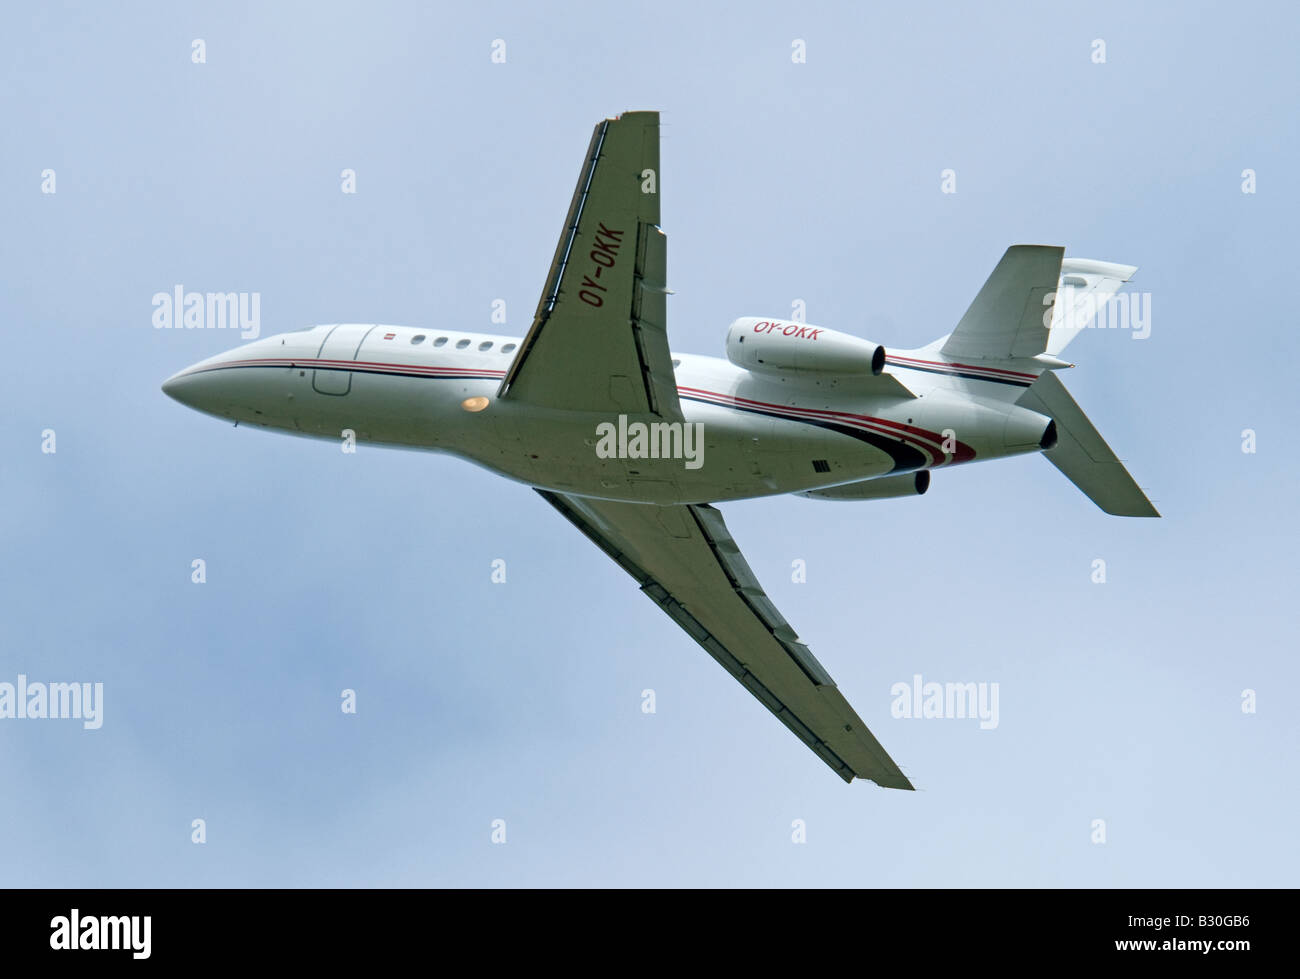 Dassault Falcon 900EX owned by the Danish Lego company leaving Inverness Airfield Stock Photo